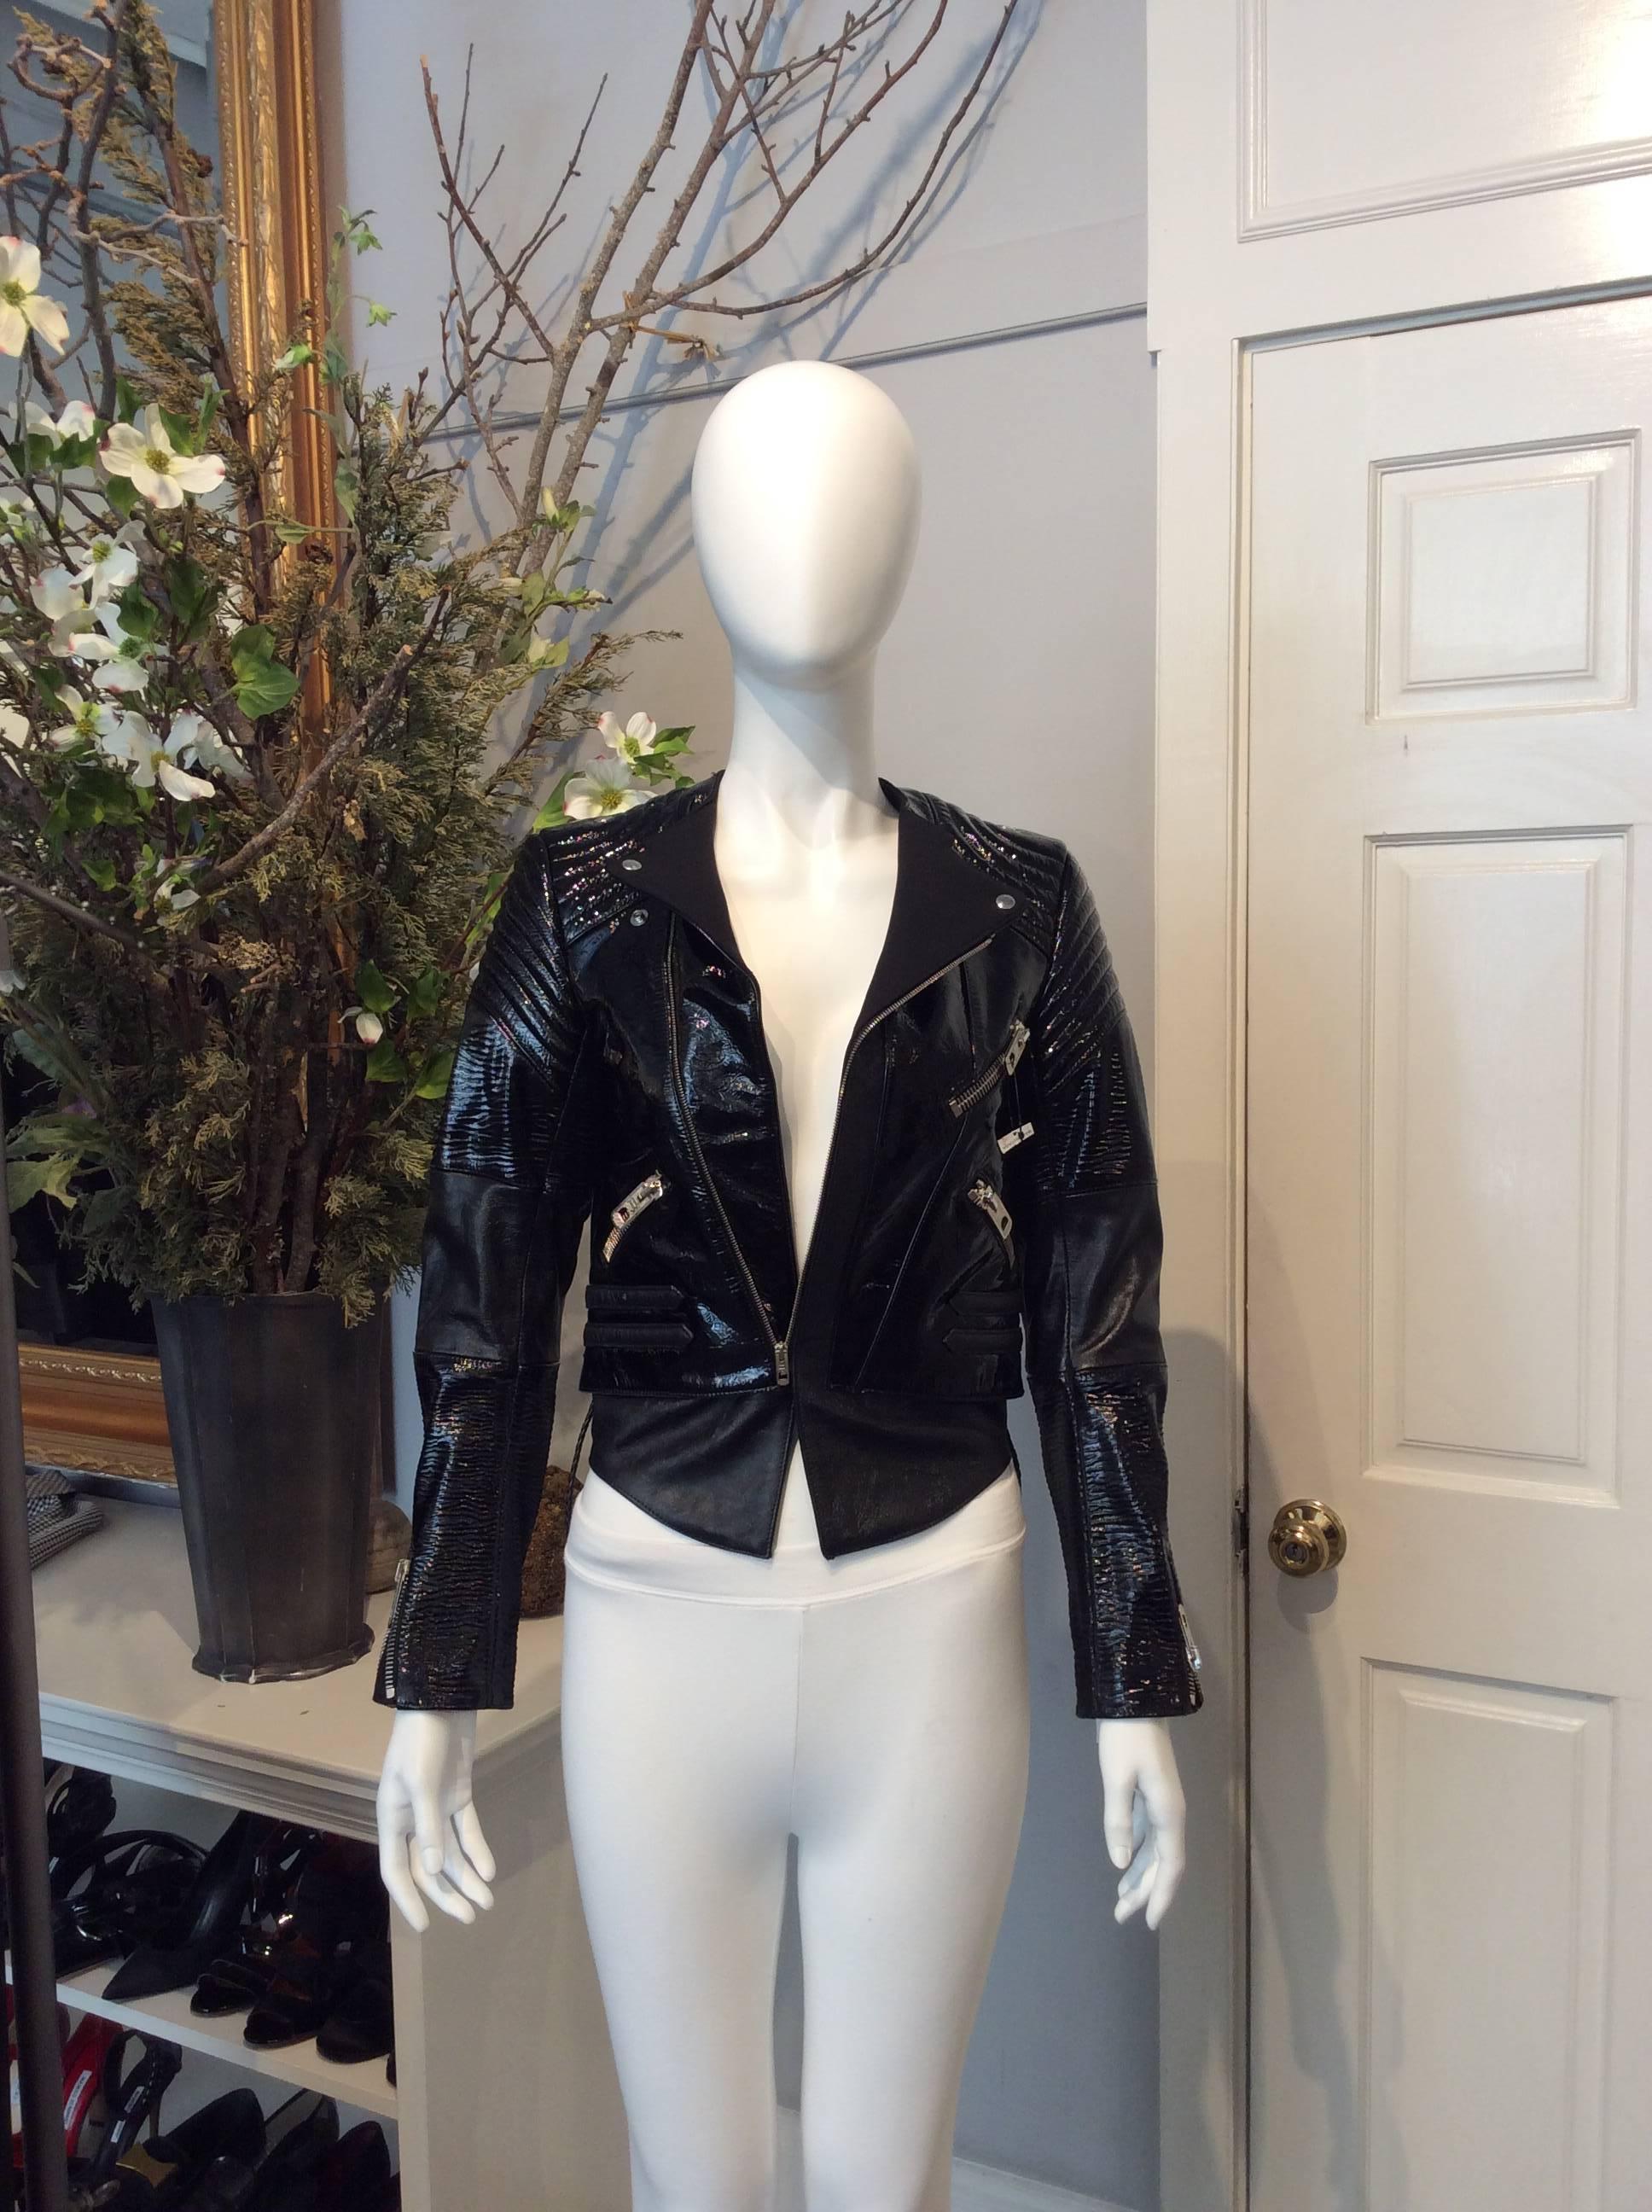 Black Balenciaga textured patent leather motorcycle jacket. Soft black lambskin on elbows and base of jacket. Assymetrical zippers on front and snap closures at lapels. Dual pockets. Dual draw strings at back. Zippers at sleeve cuffs. Cut for a very